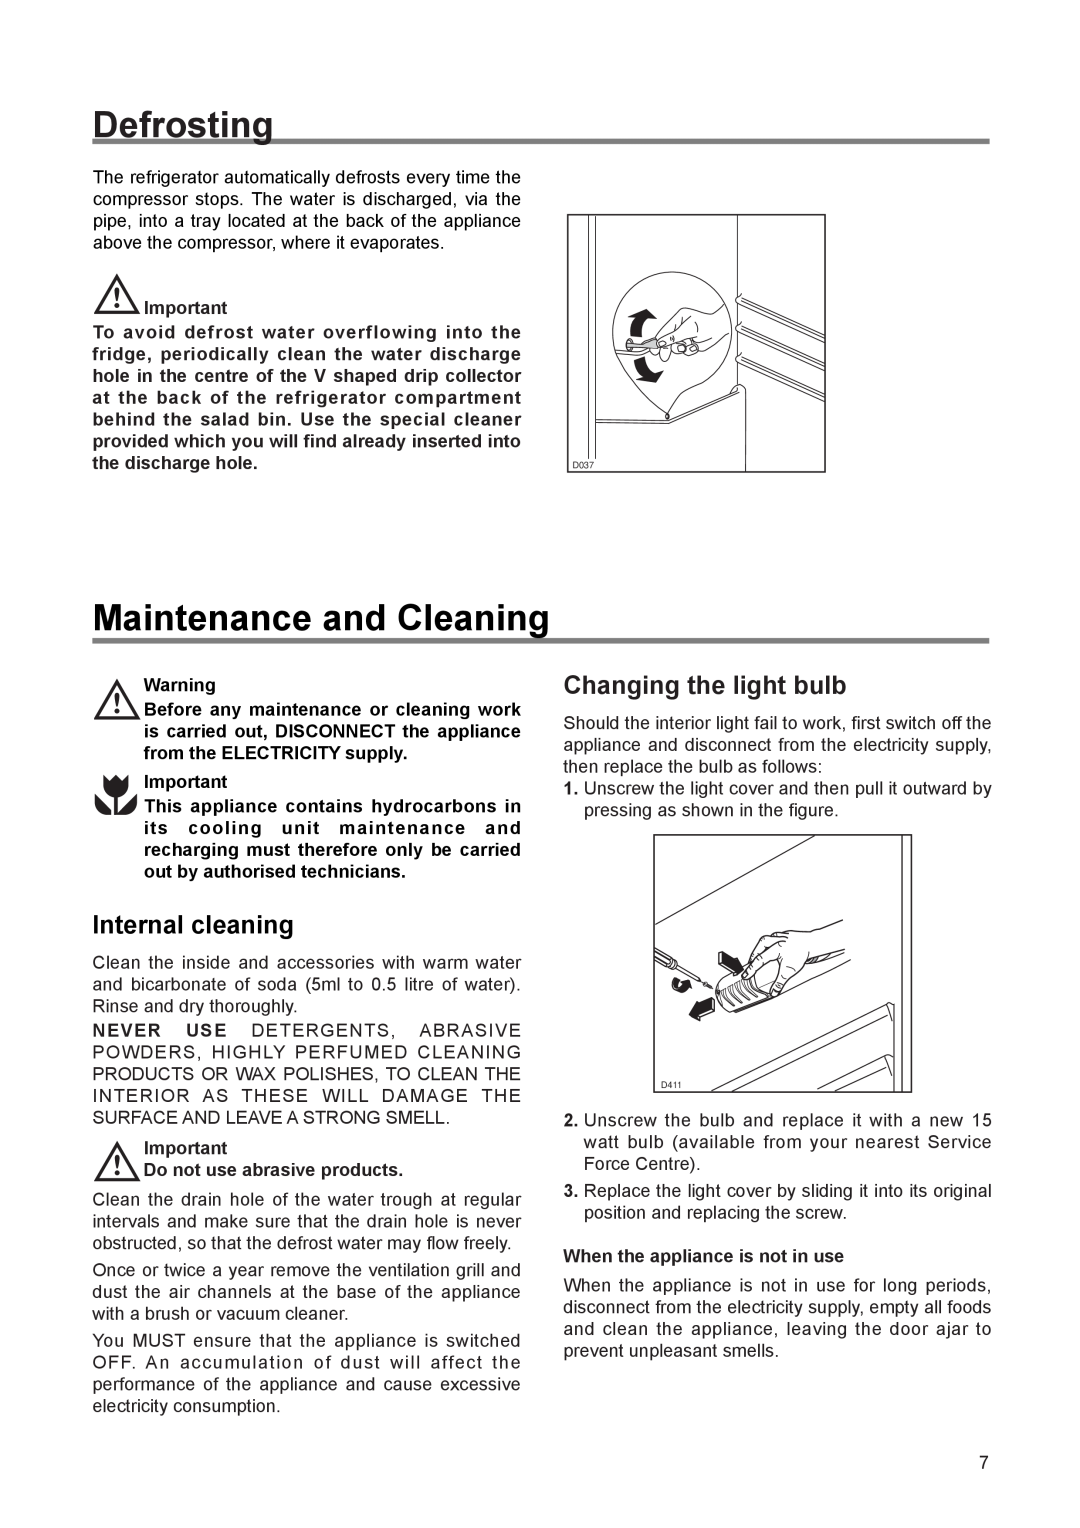 Electrolux ERN 1673 manual Defrosting, Maintenance and Cleaning, Internal cleaning, Changing the light bulb 